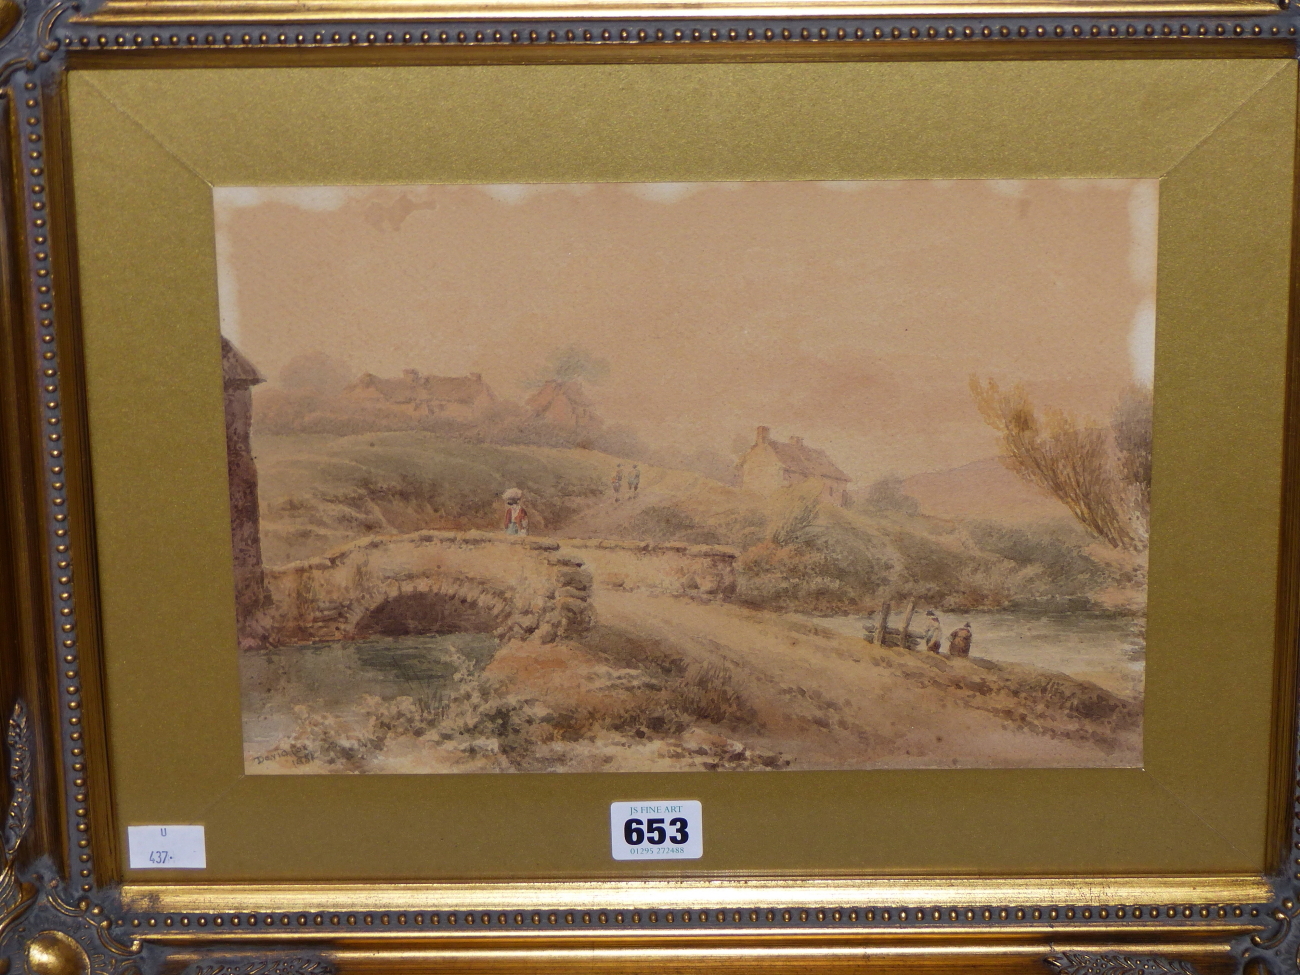 MANNER OF DAVID COX, FIGURES IN A RURAL SCENE BY A BRIDGE OVER A RIVER, BEARS SIGNATURE AND DATE - Image 2 of 5